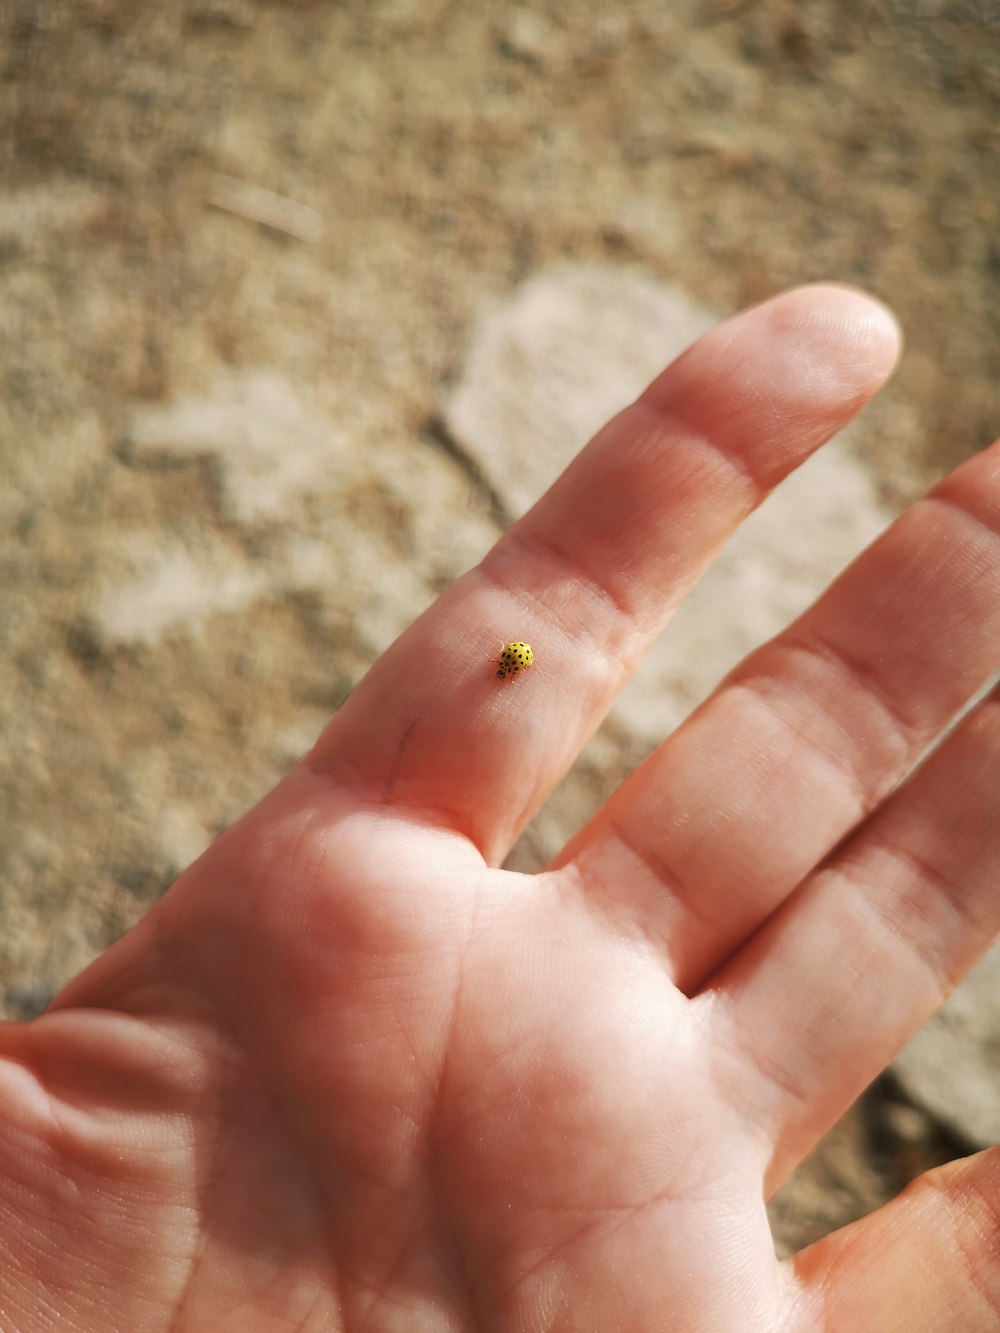 a hand holding a tiny yellow object in it's palm